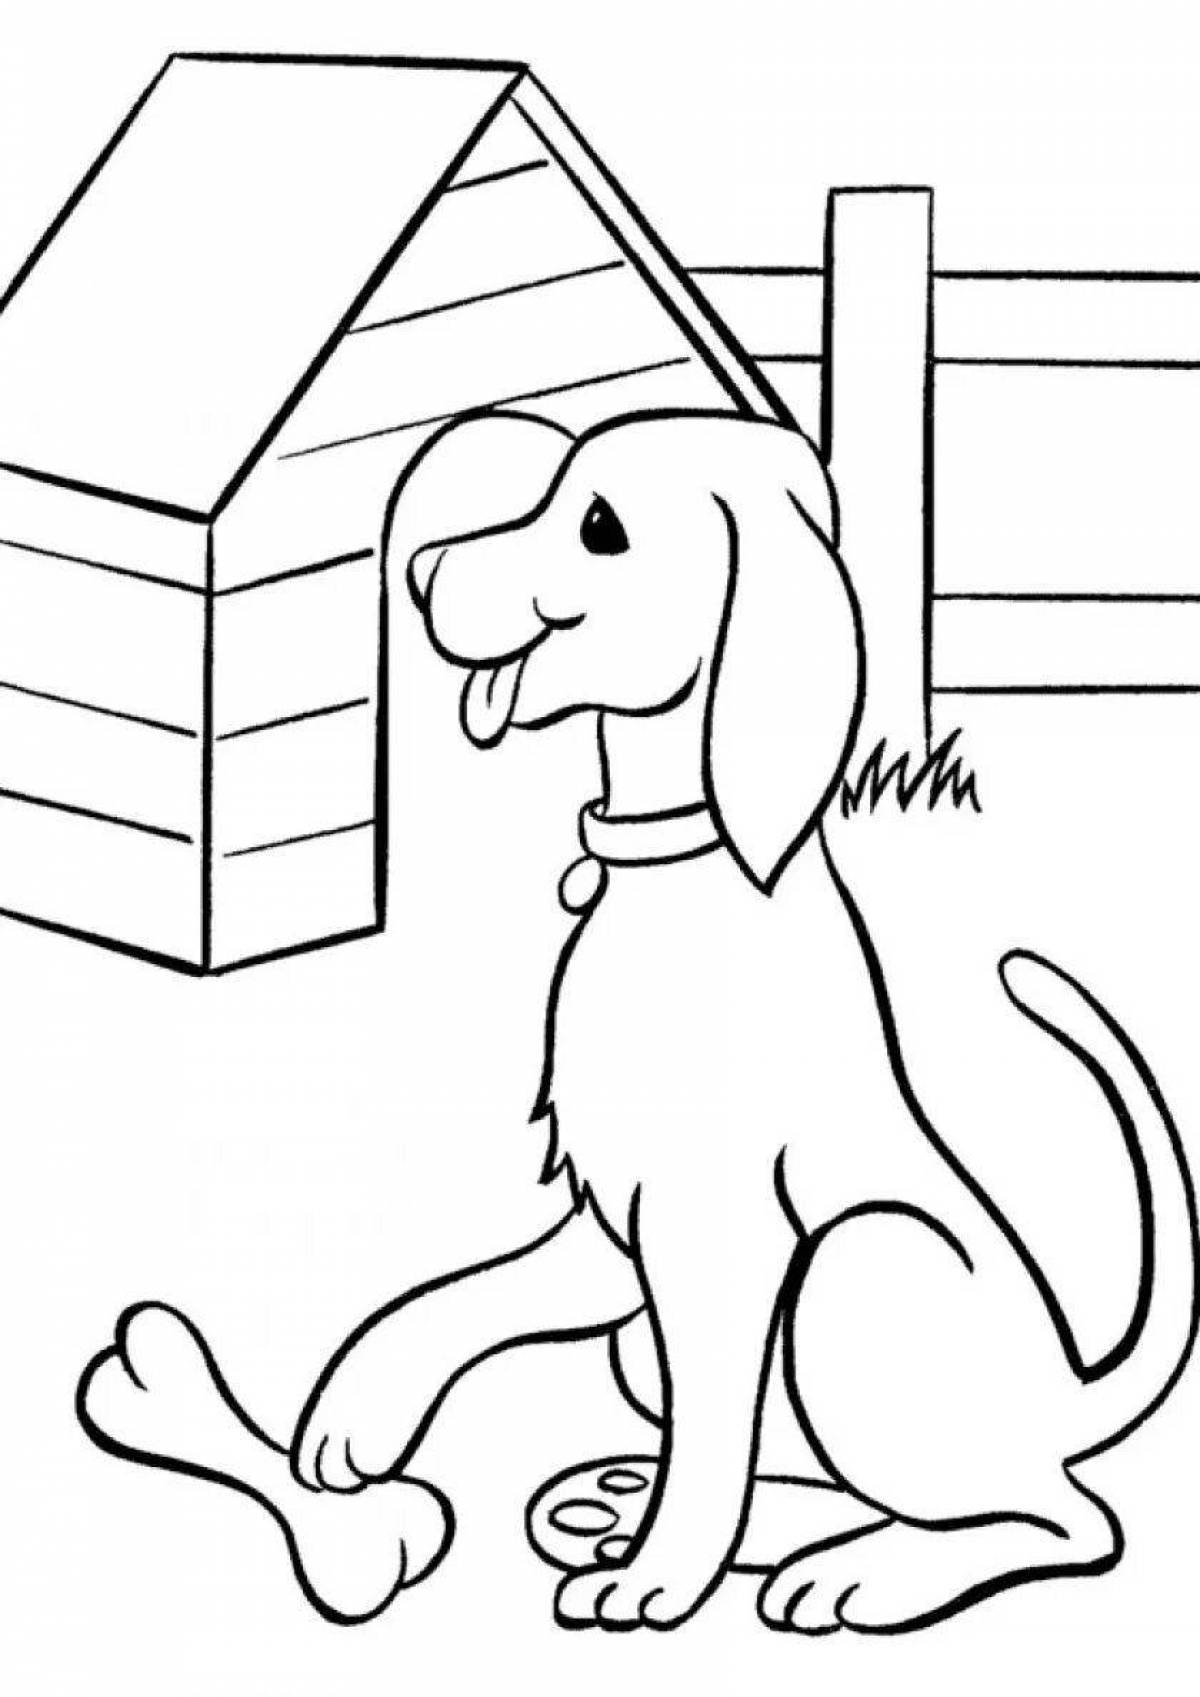 Exciting doghouse coloring book